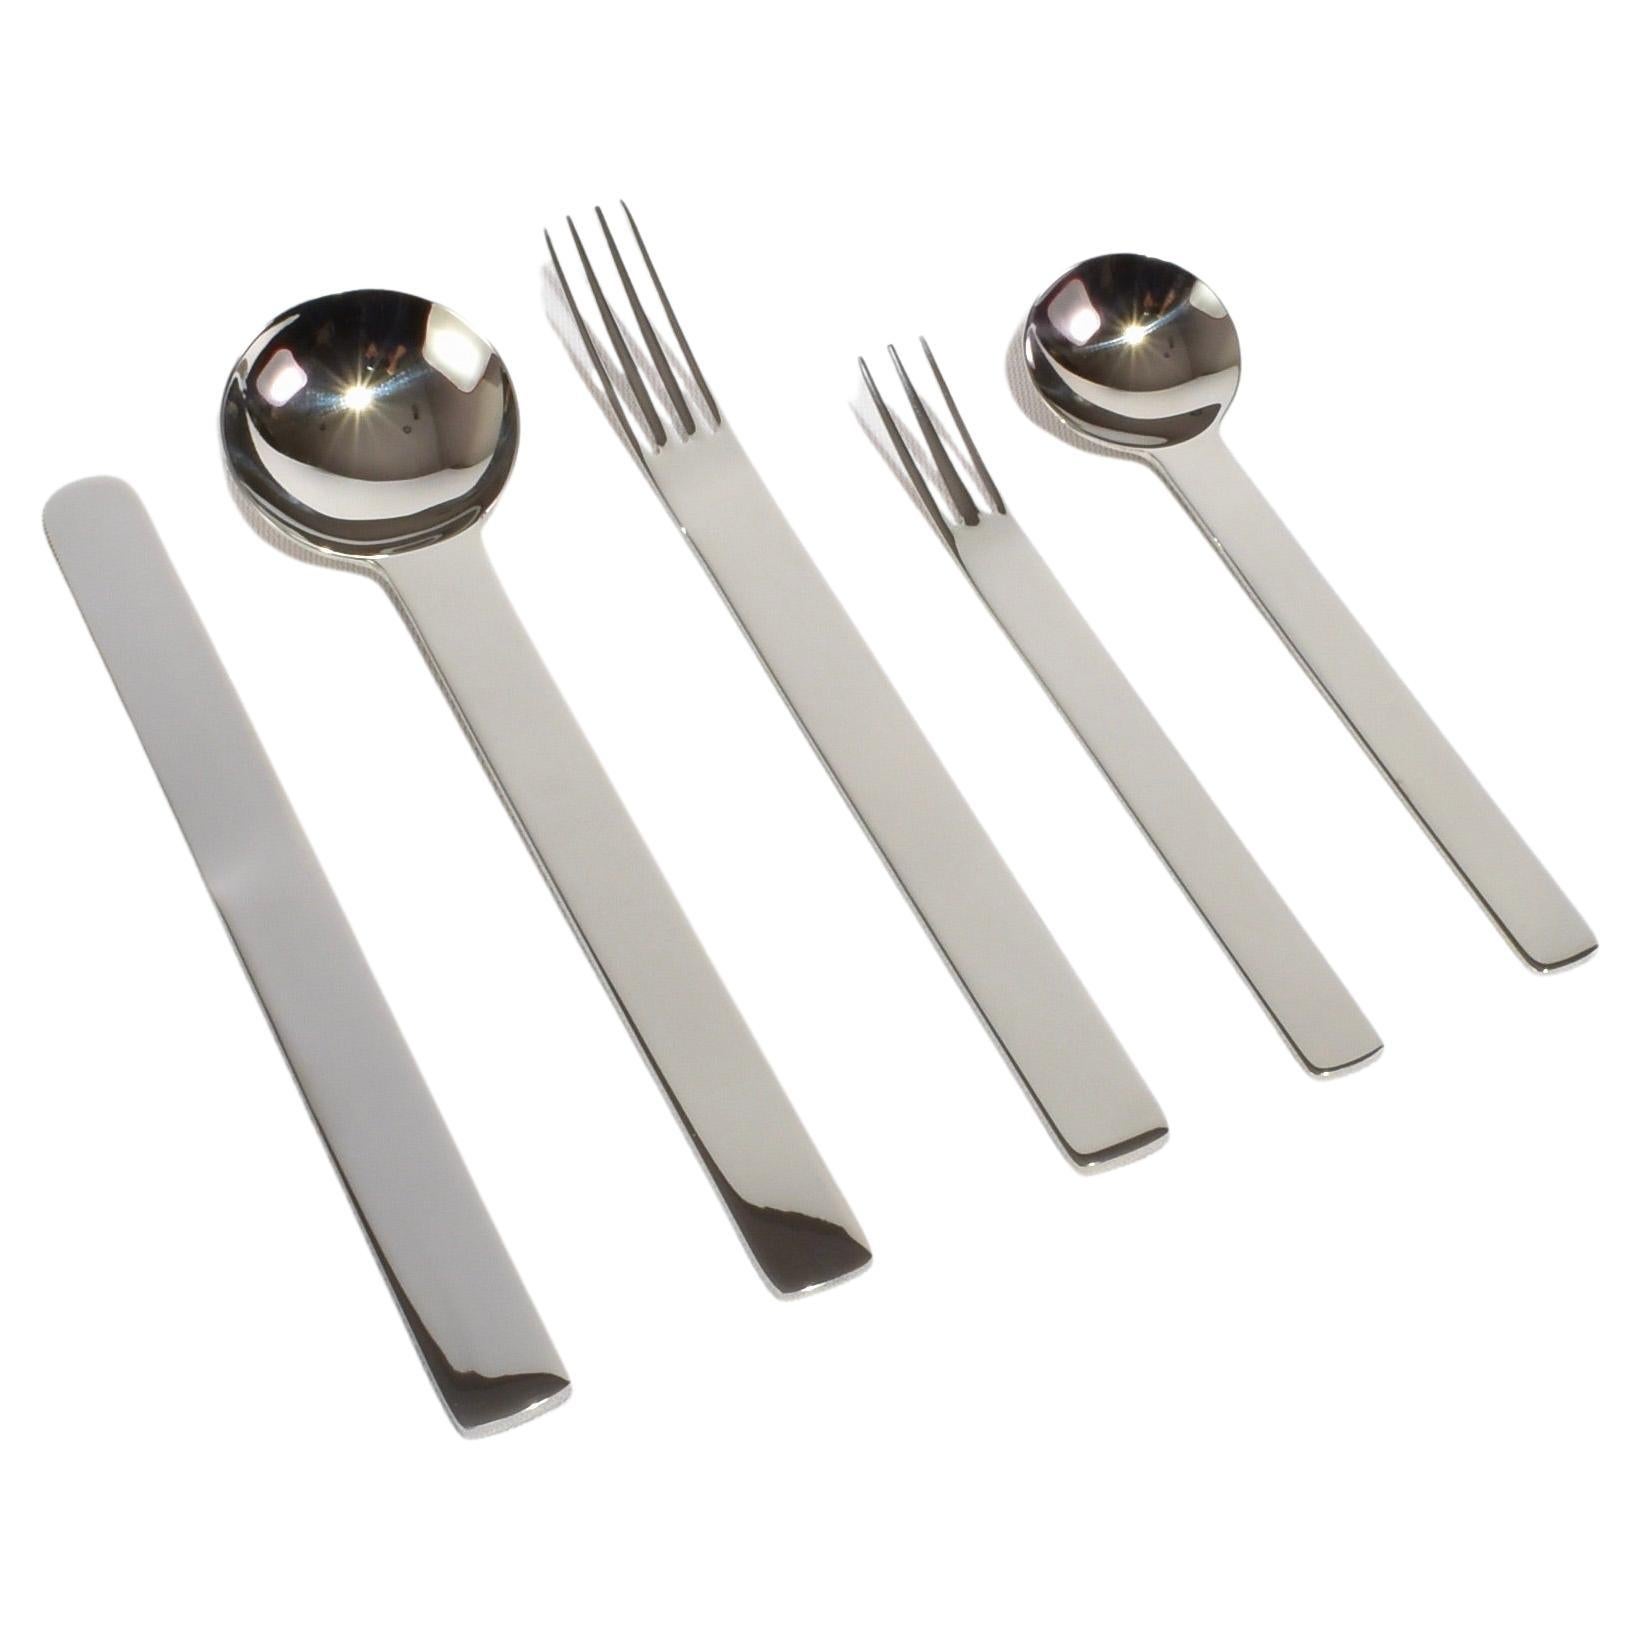 TI-1 Boxed Cutlery Set, Shiny For Sale